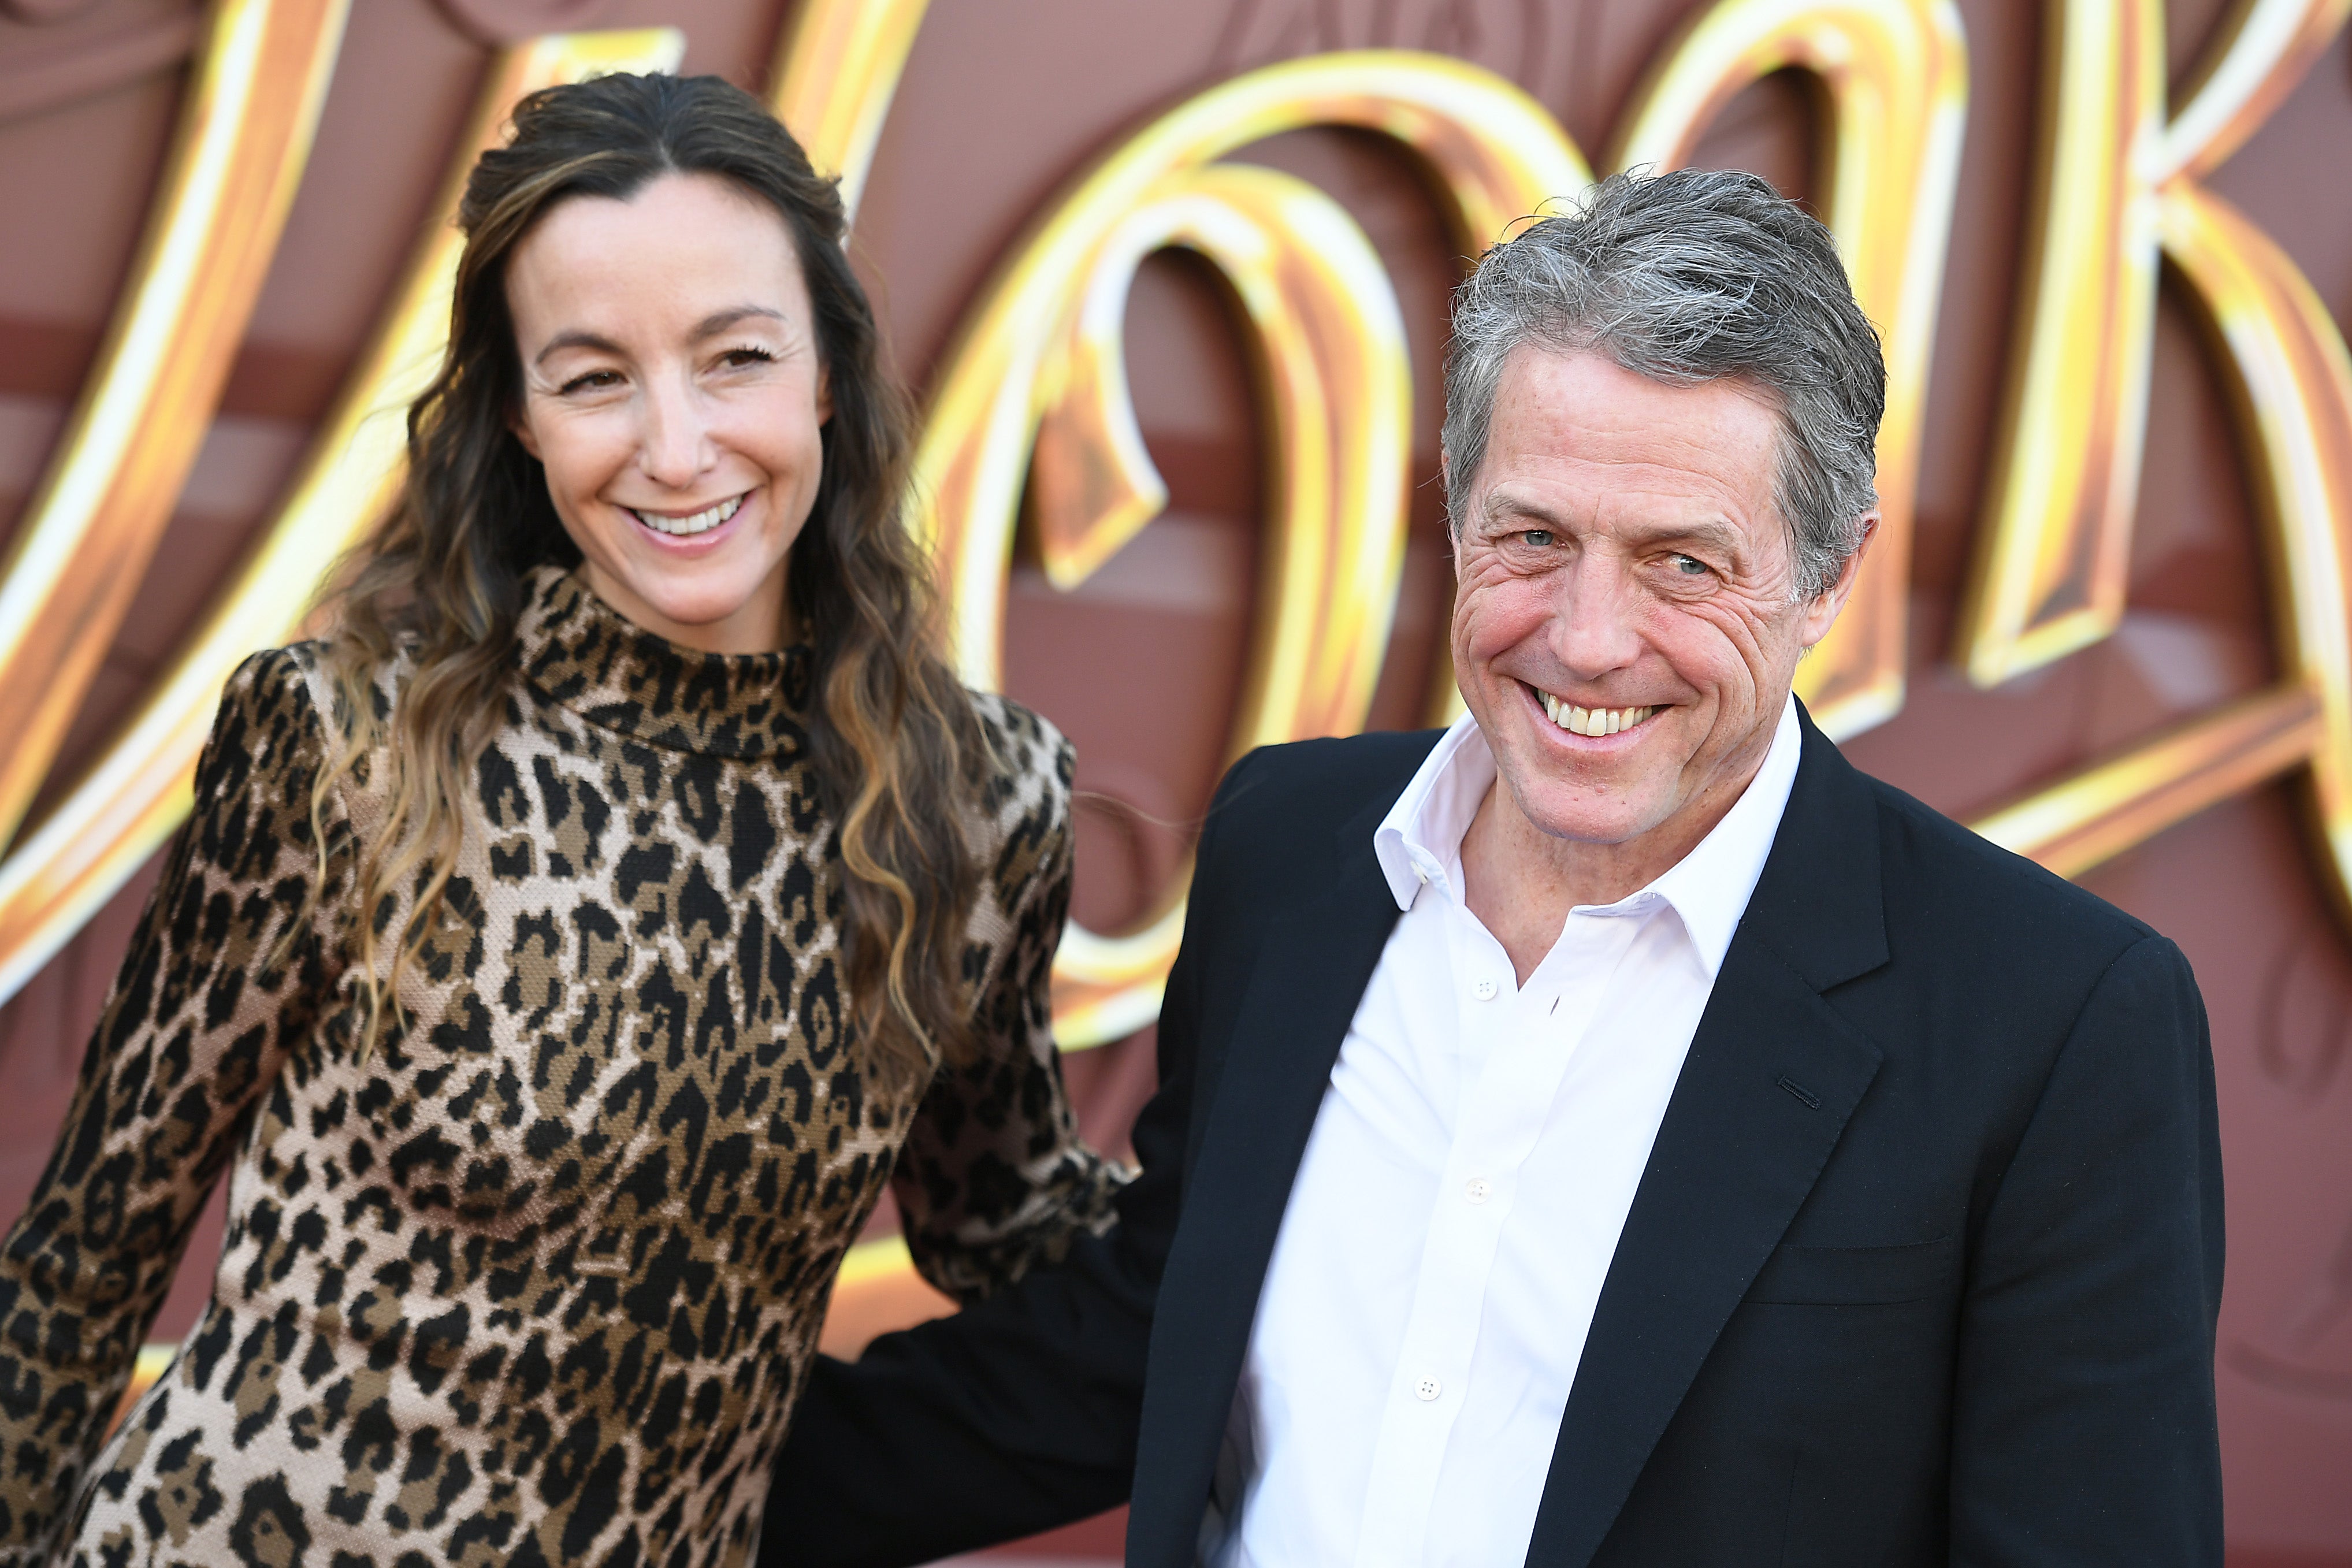 Hugh Grant and his wife Anna Elisabet Eberstein donated £20,000 to Depher this month alone